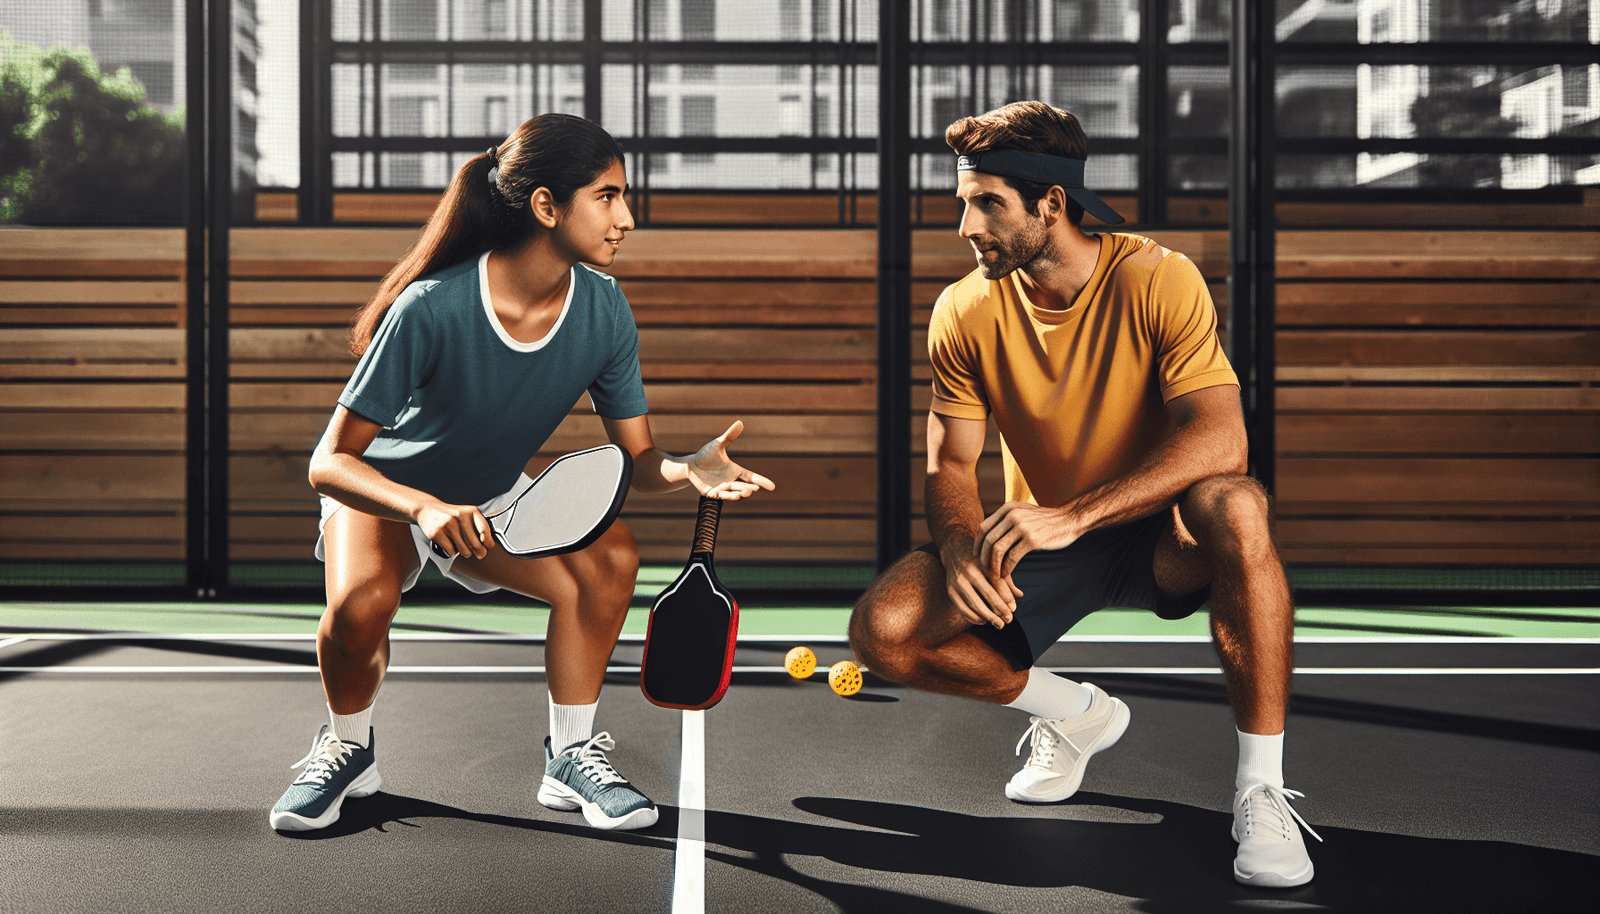 How To Find The Perfect Pickleball Partner